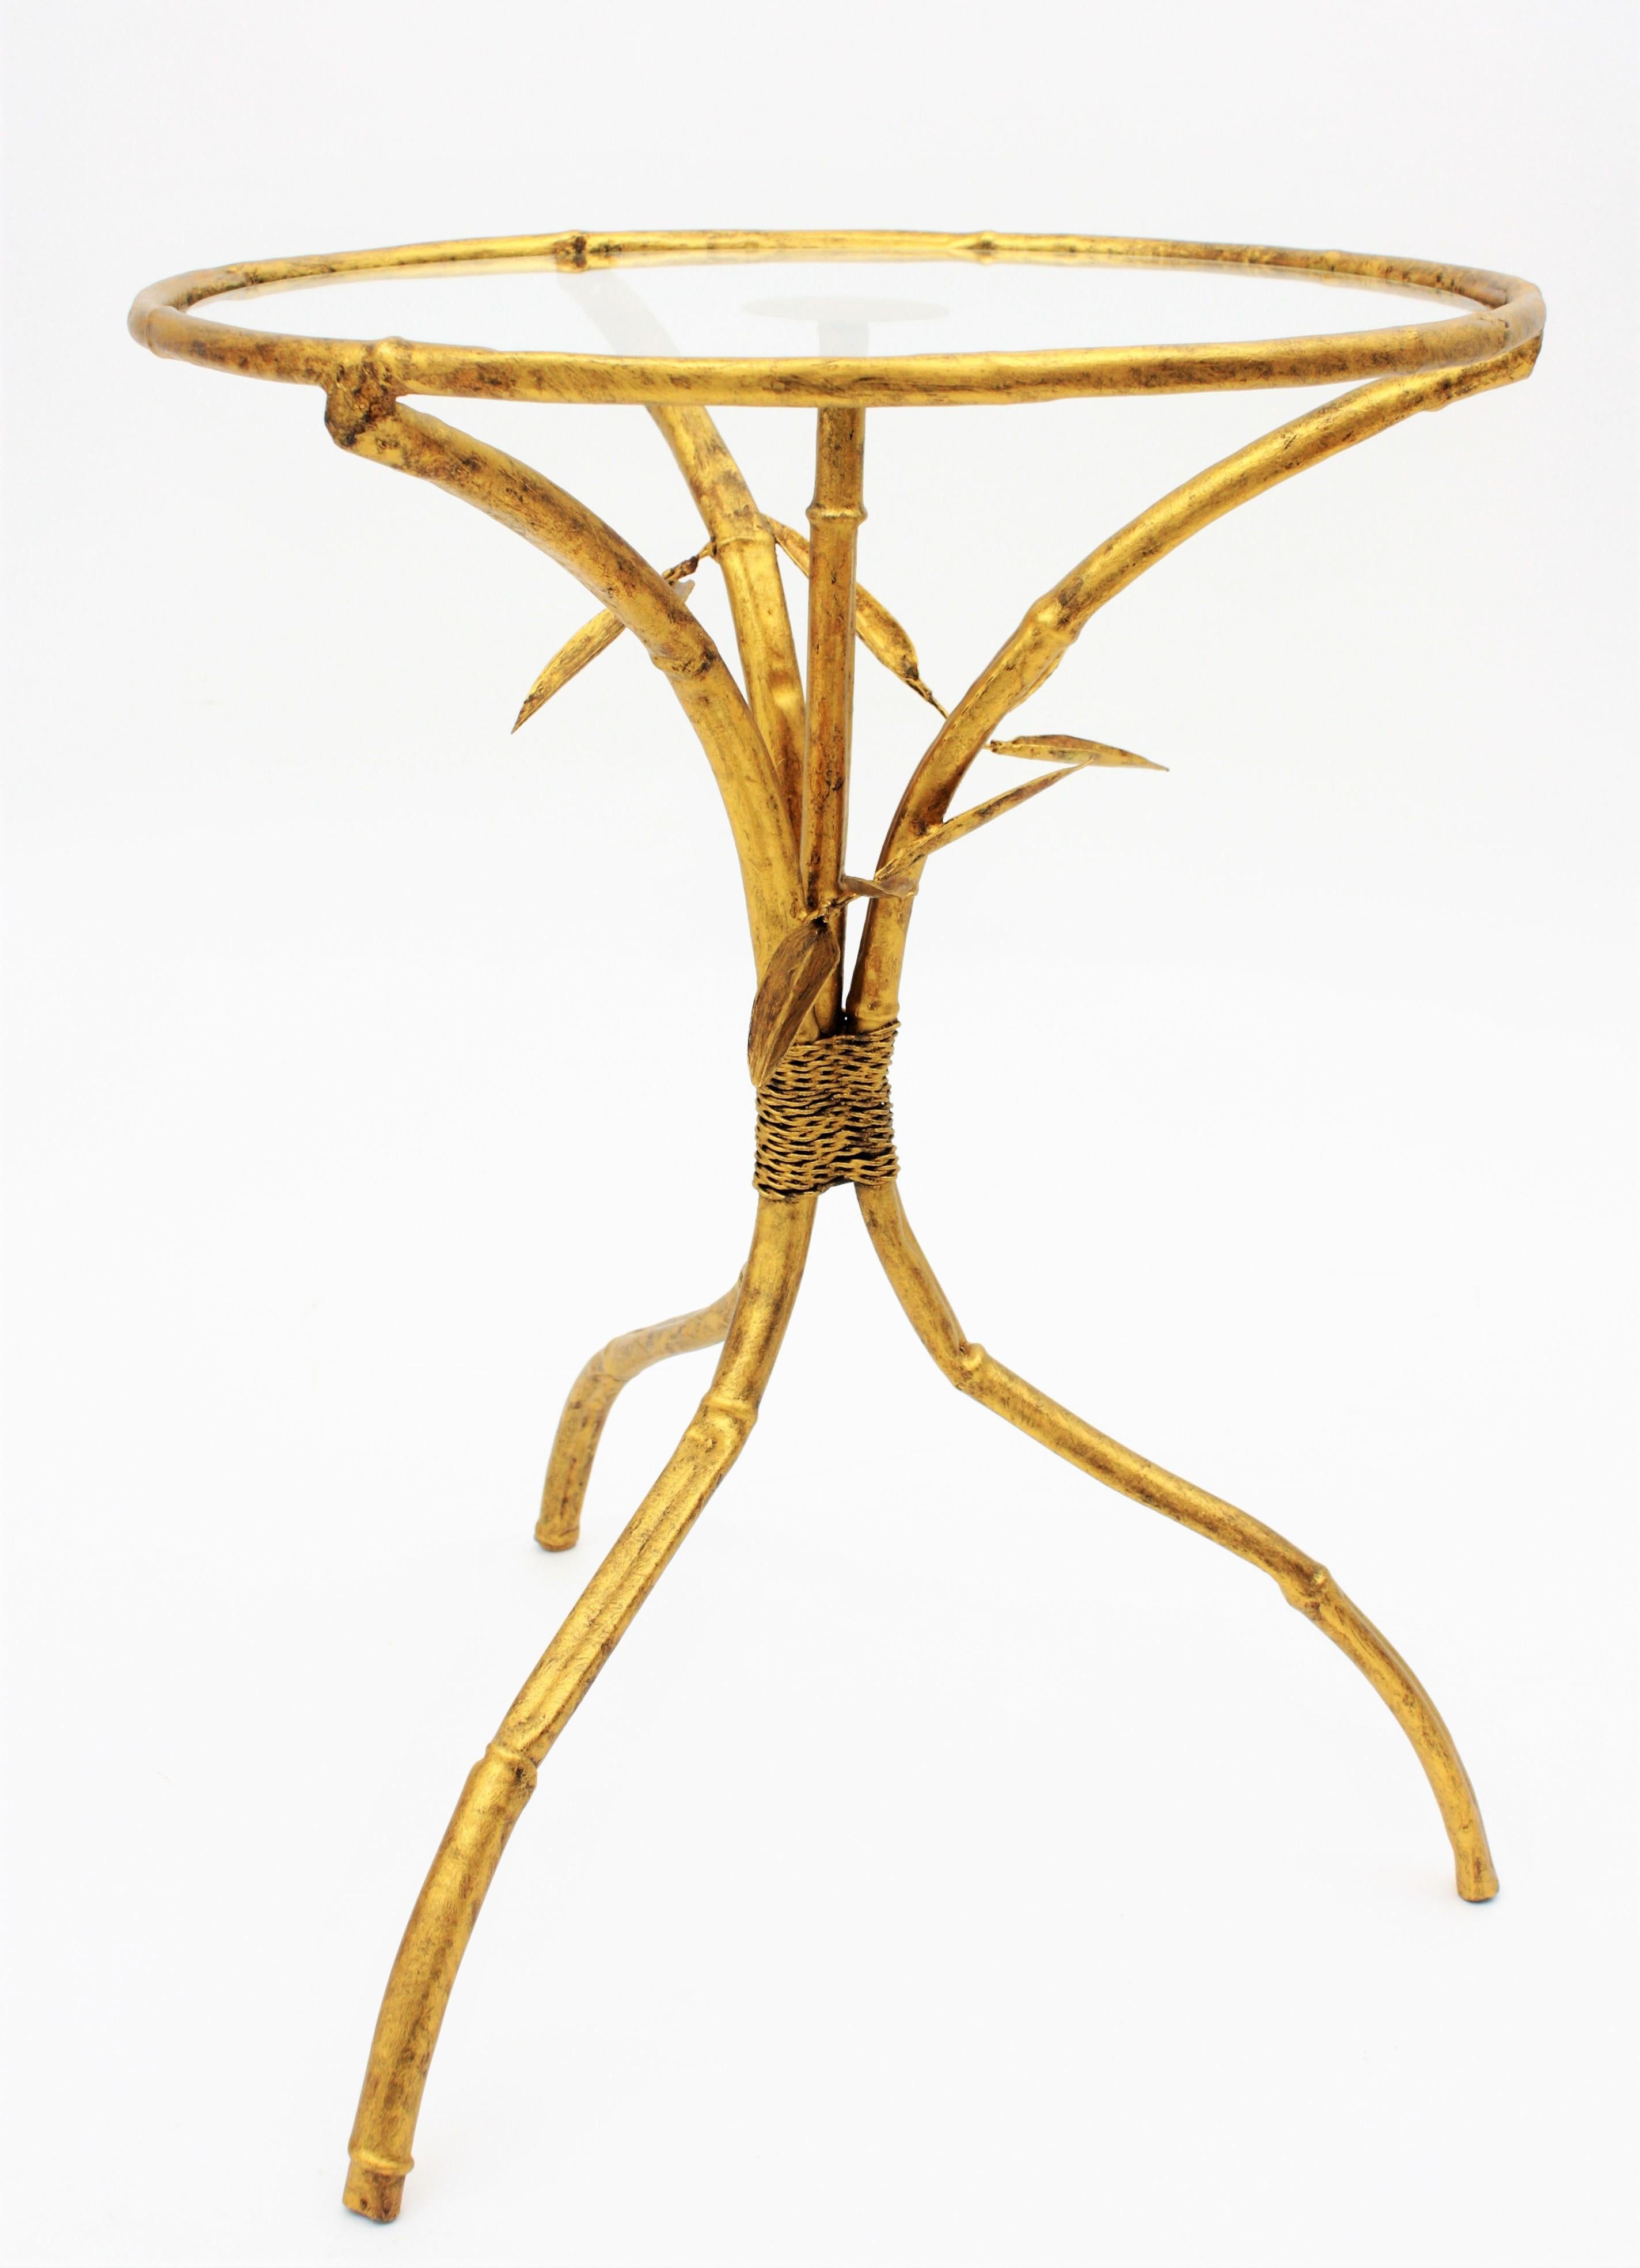 Glass Gilt Wrought Iron Gueridon End Drinks Table / Side Table, Faux Bamboo Design